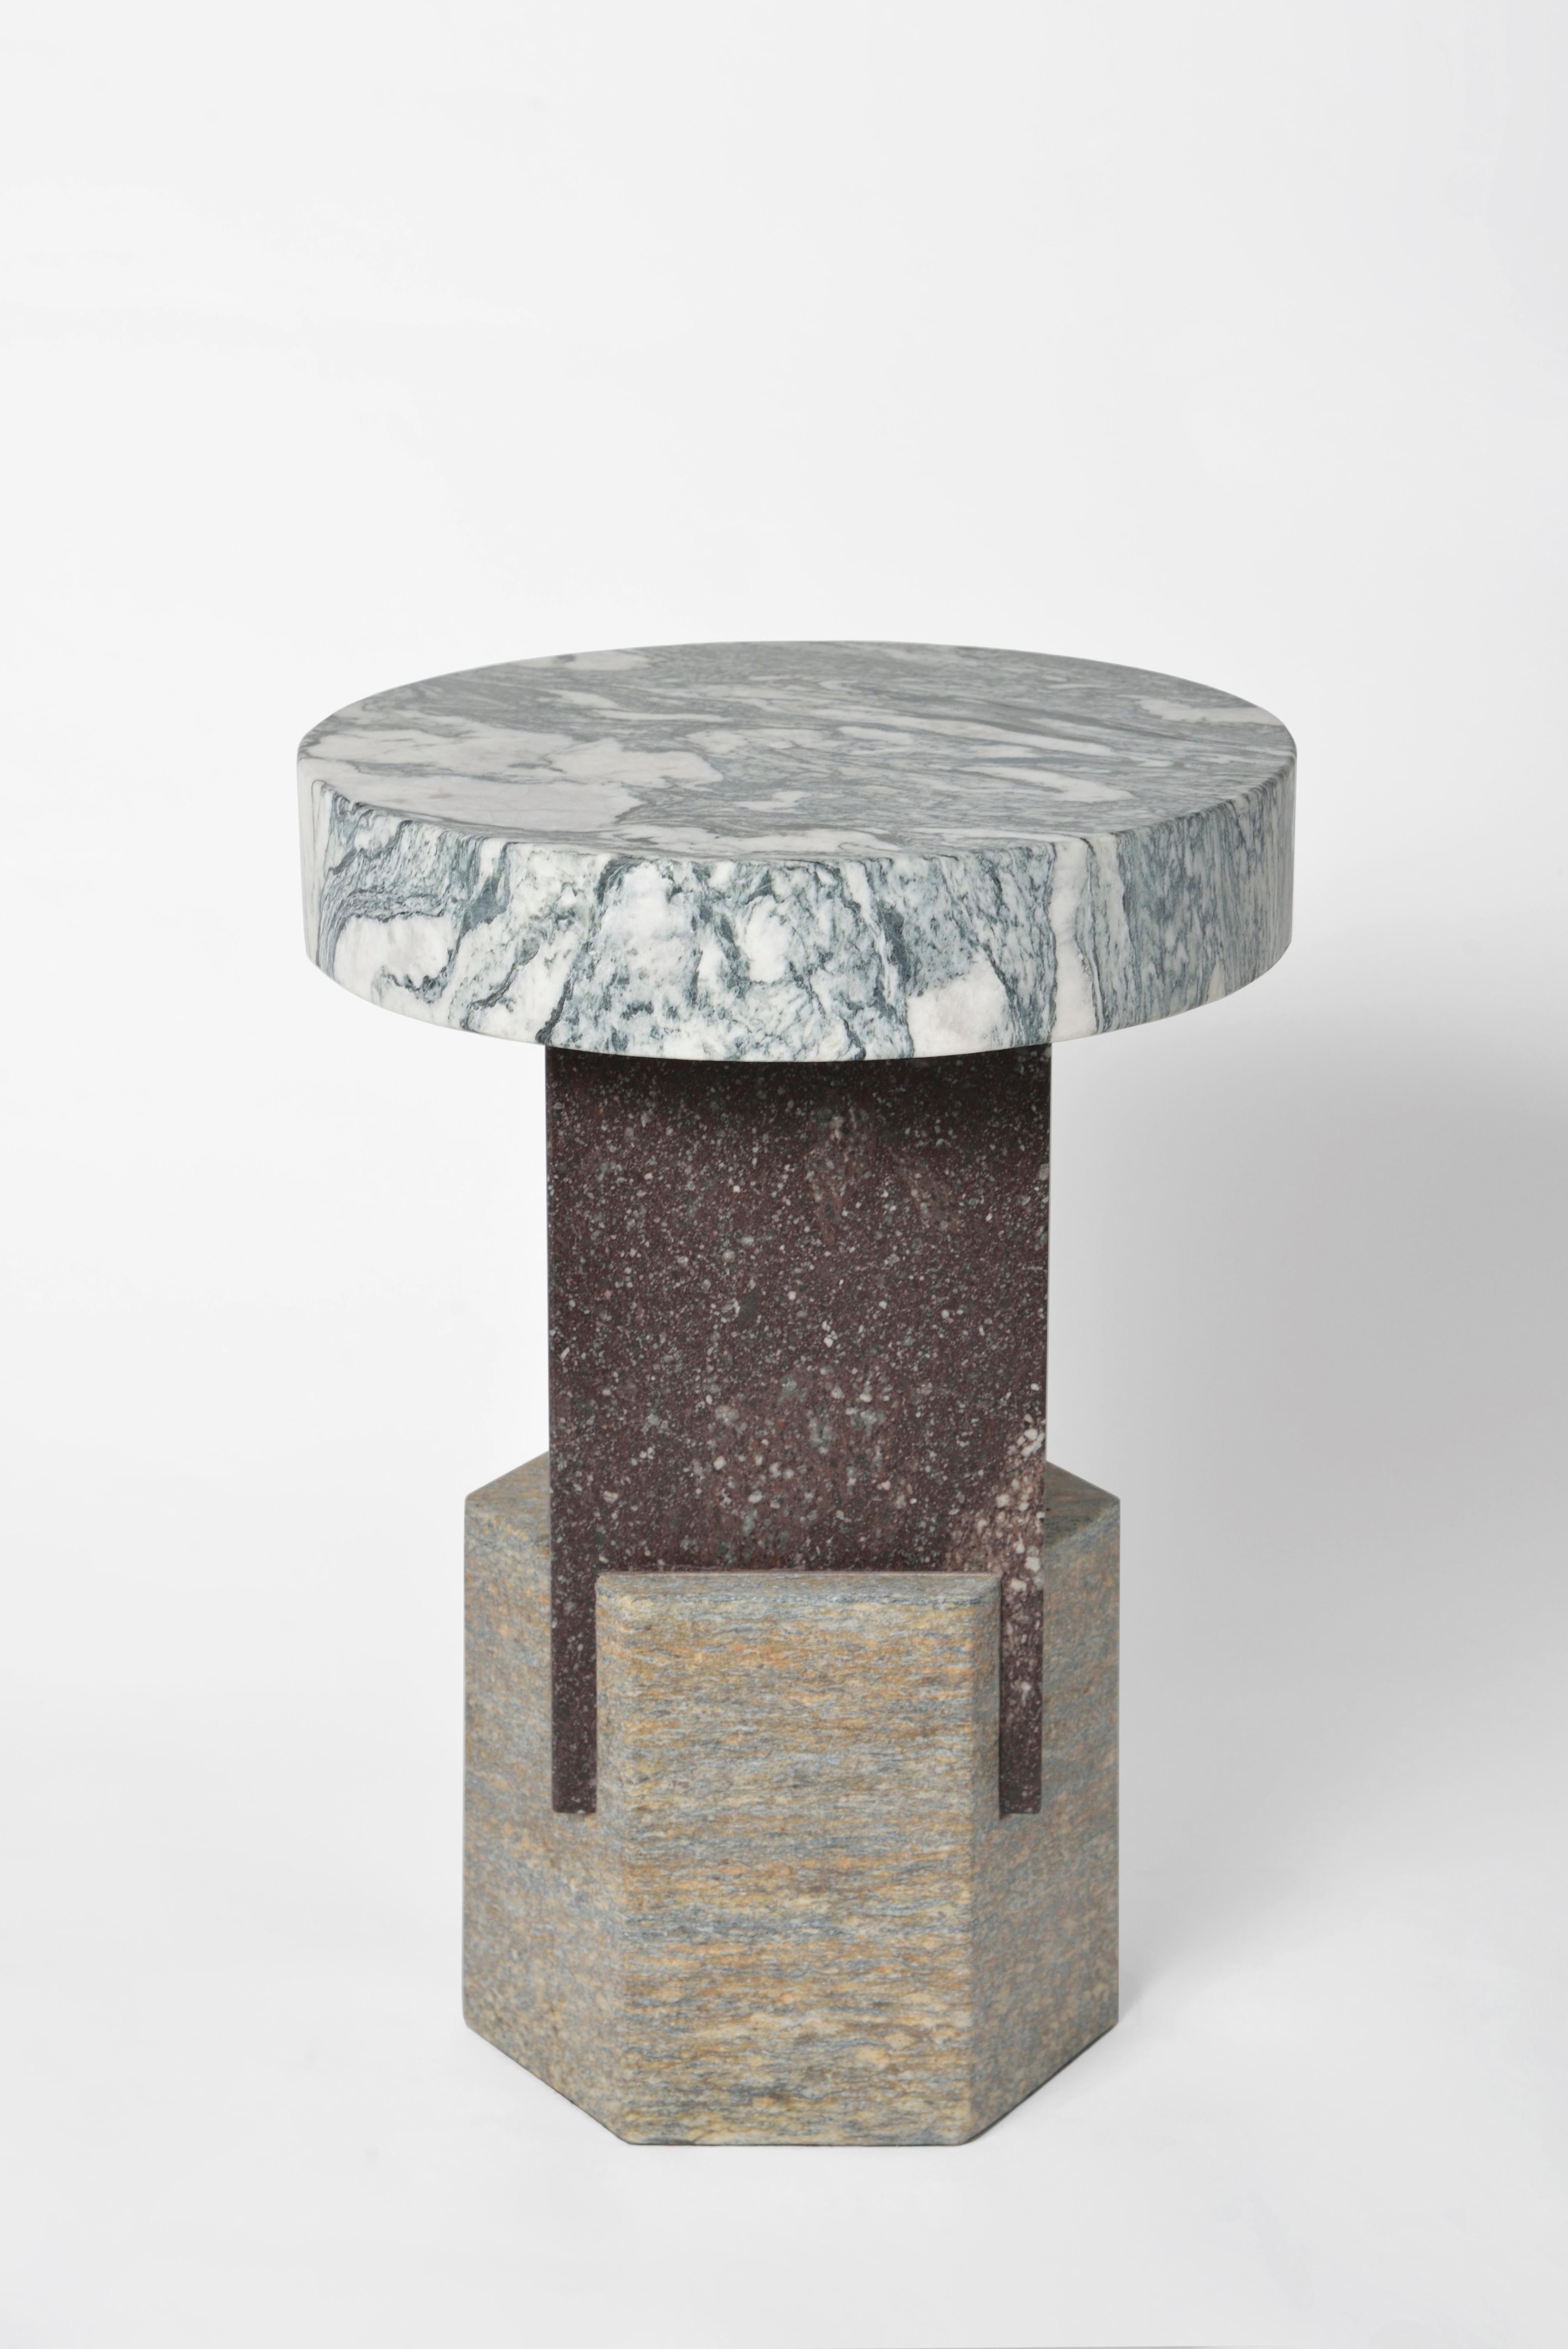 Marble dorik stool by Oeuffice
Edition: 12 + 2AP
2014
Dimensions: 30 x 30 x 42 cm
Materials: Cipollino apuano marble, porfido red marble, luzerna stone in aged yellow

Kapital is a series of limited edition tables and stools based on essential